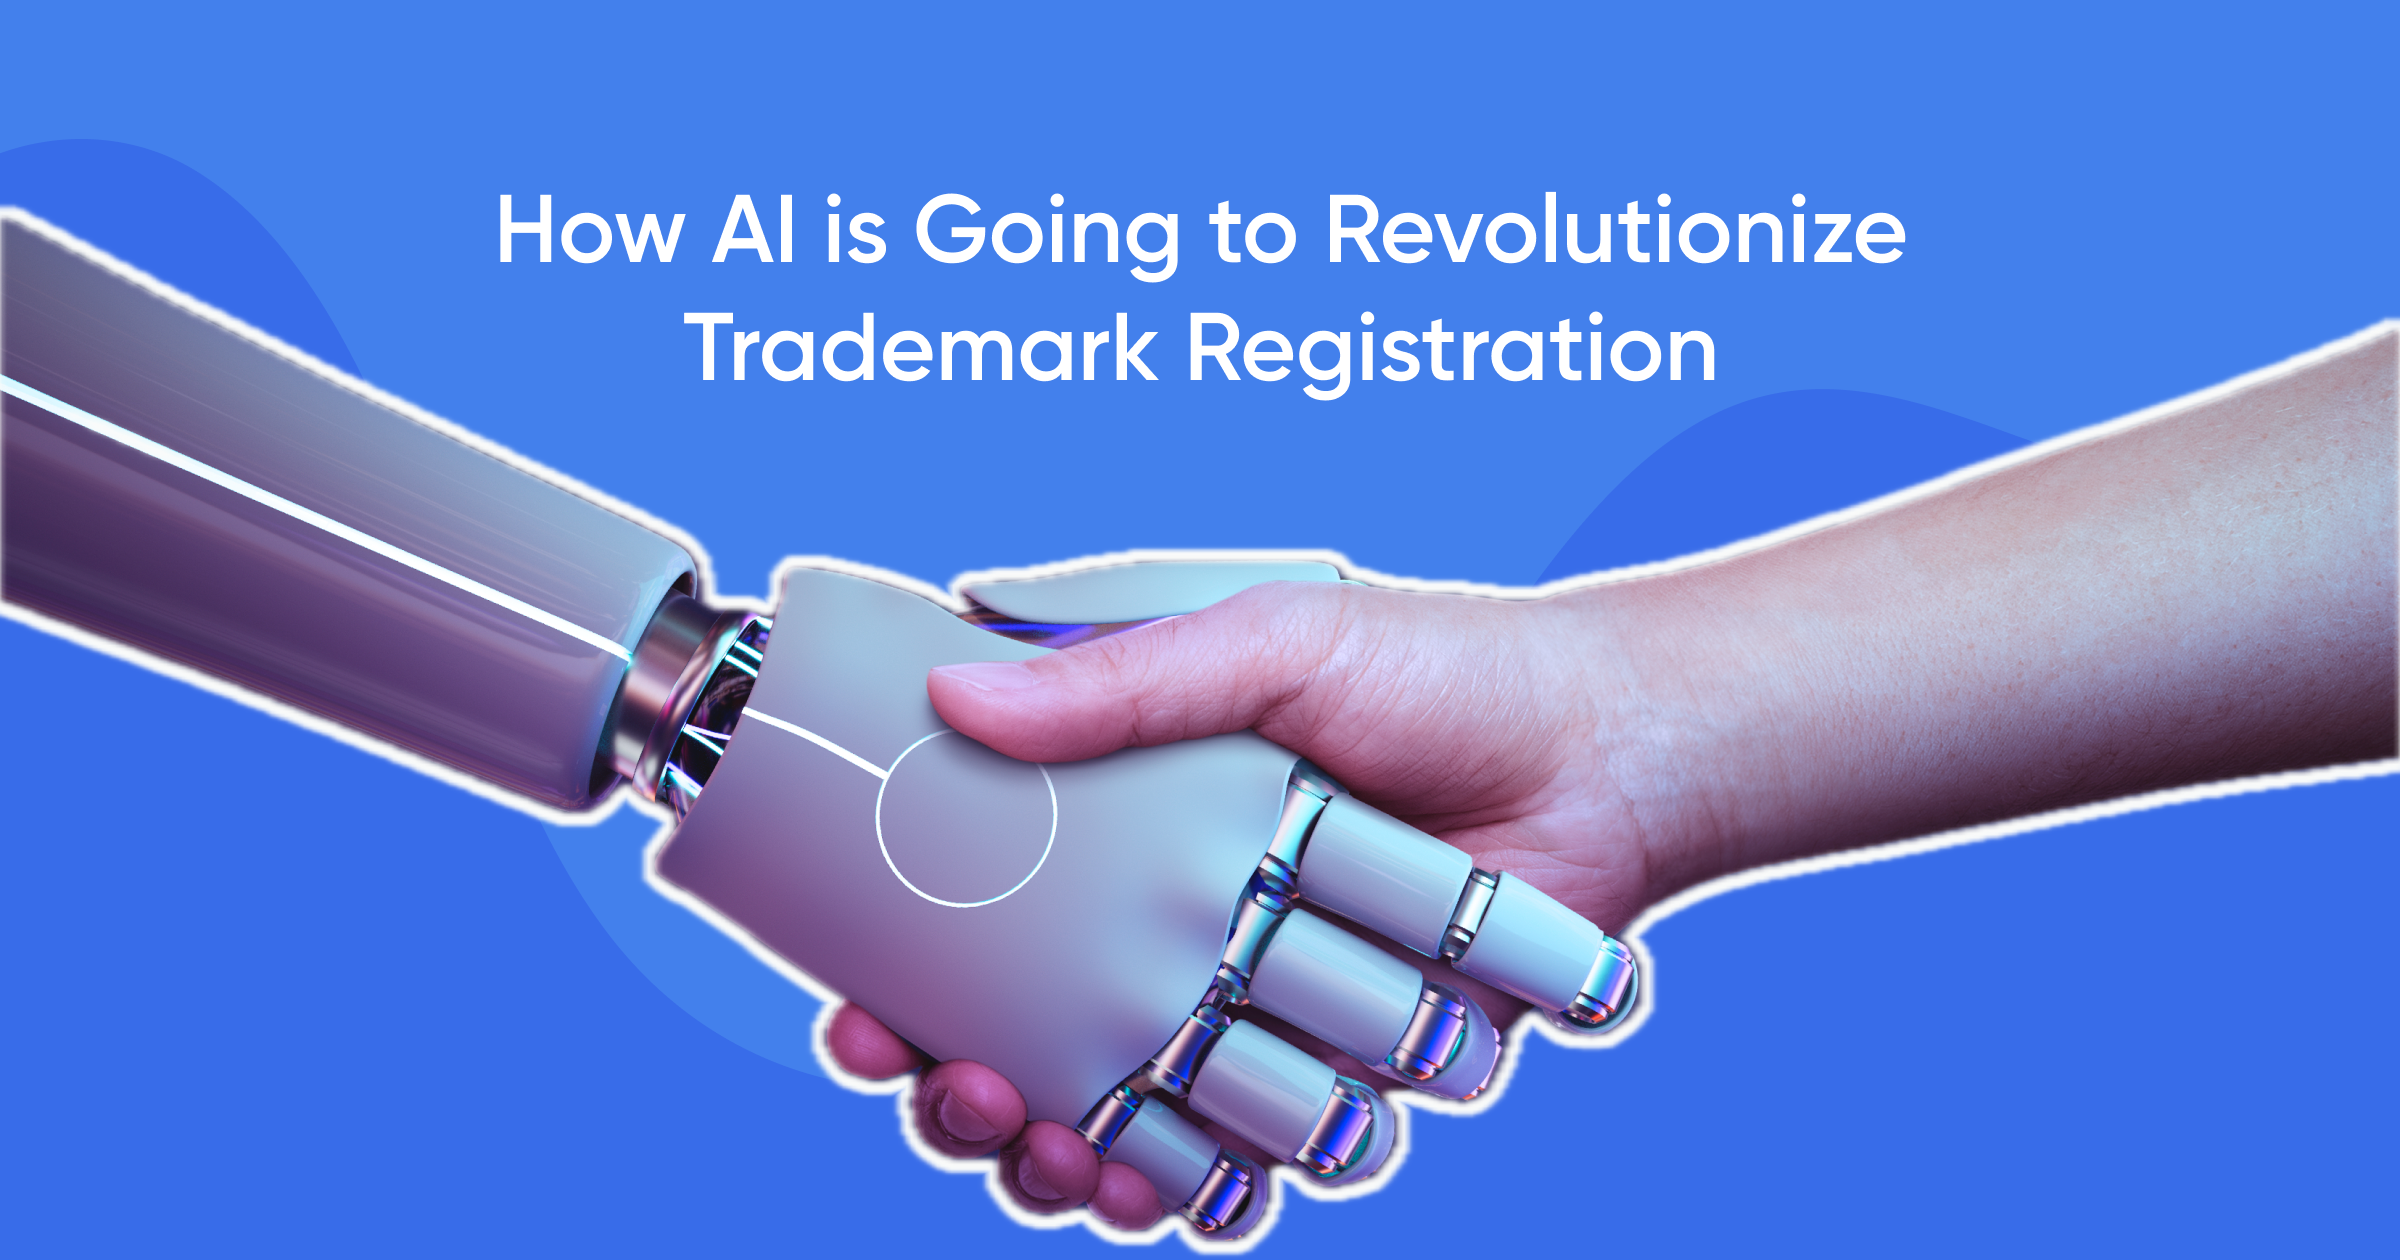 How AI is Going to Revolutionize Trademark Registration